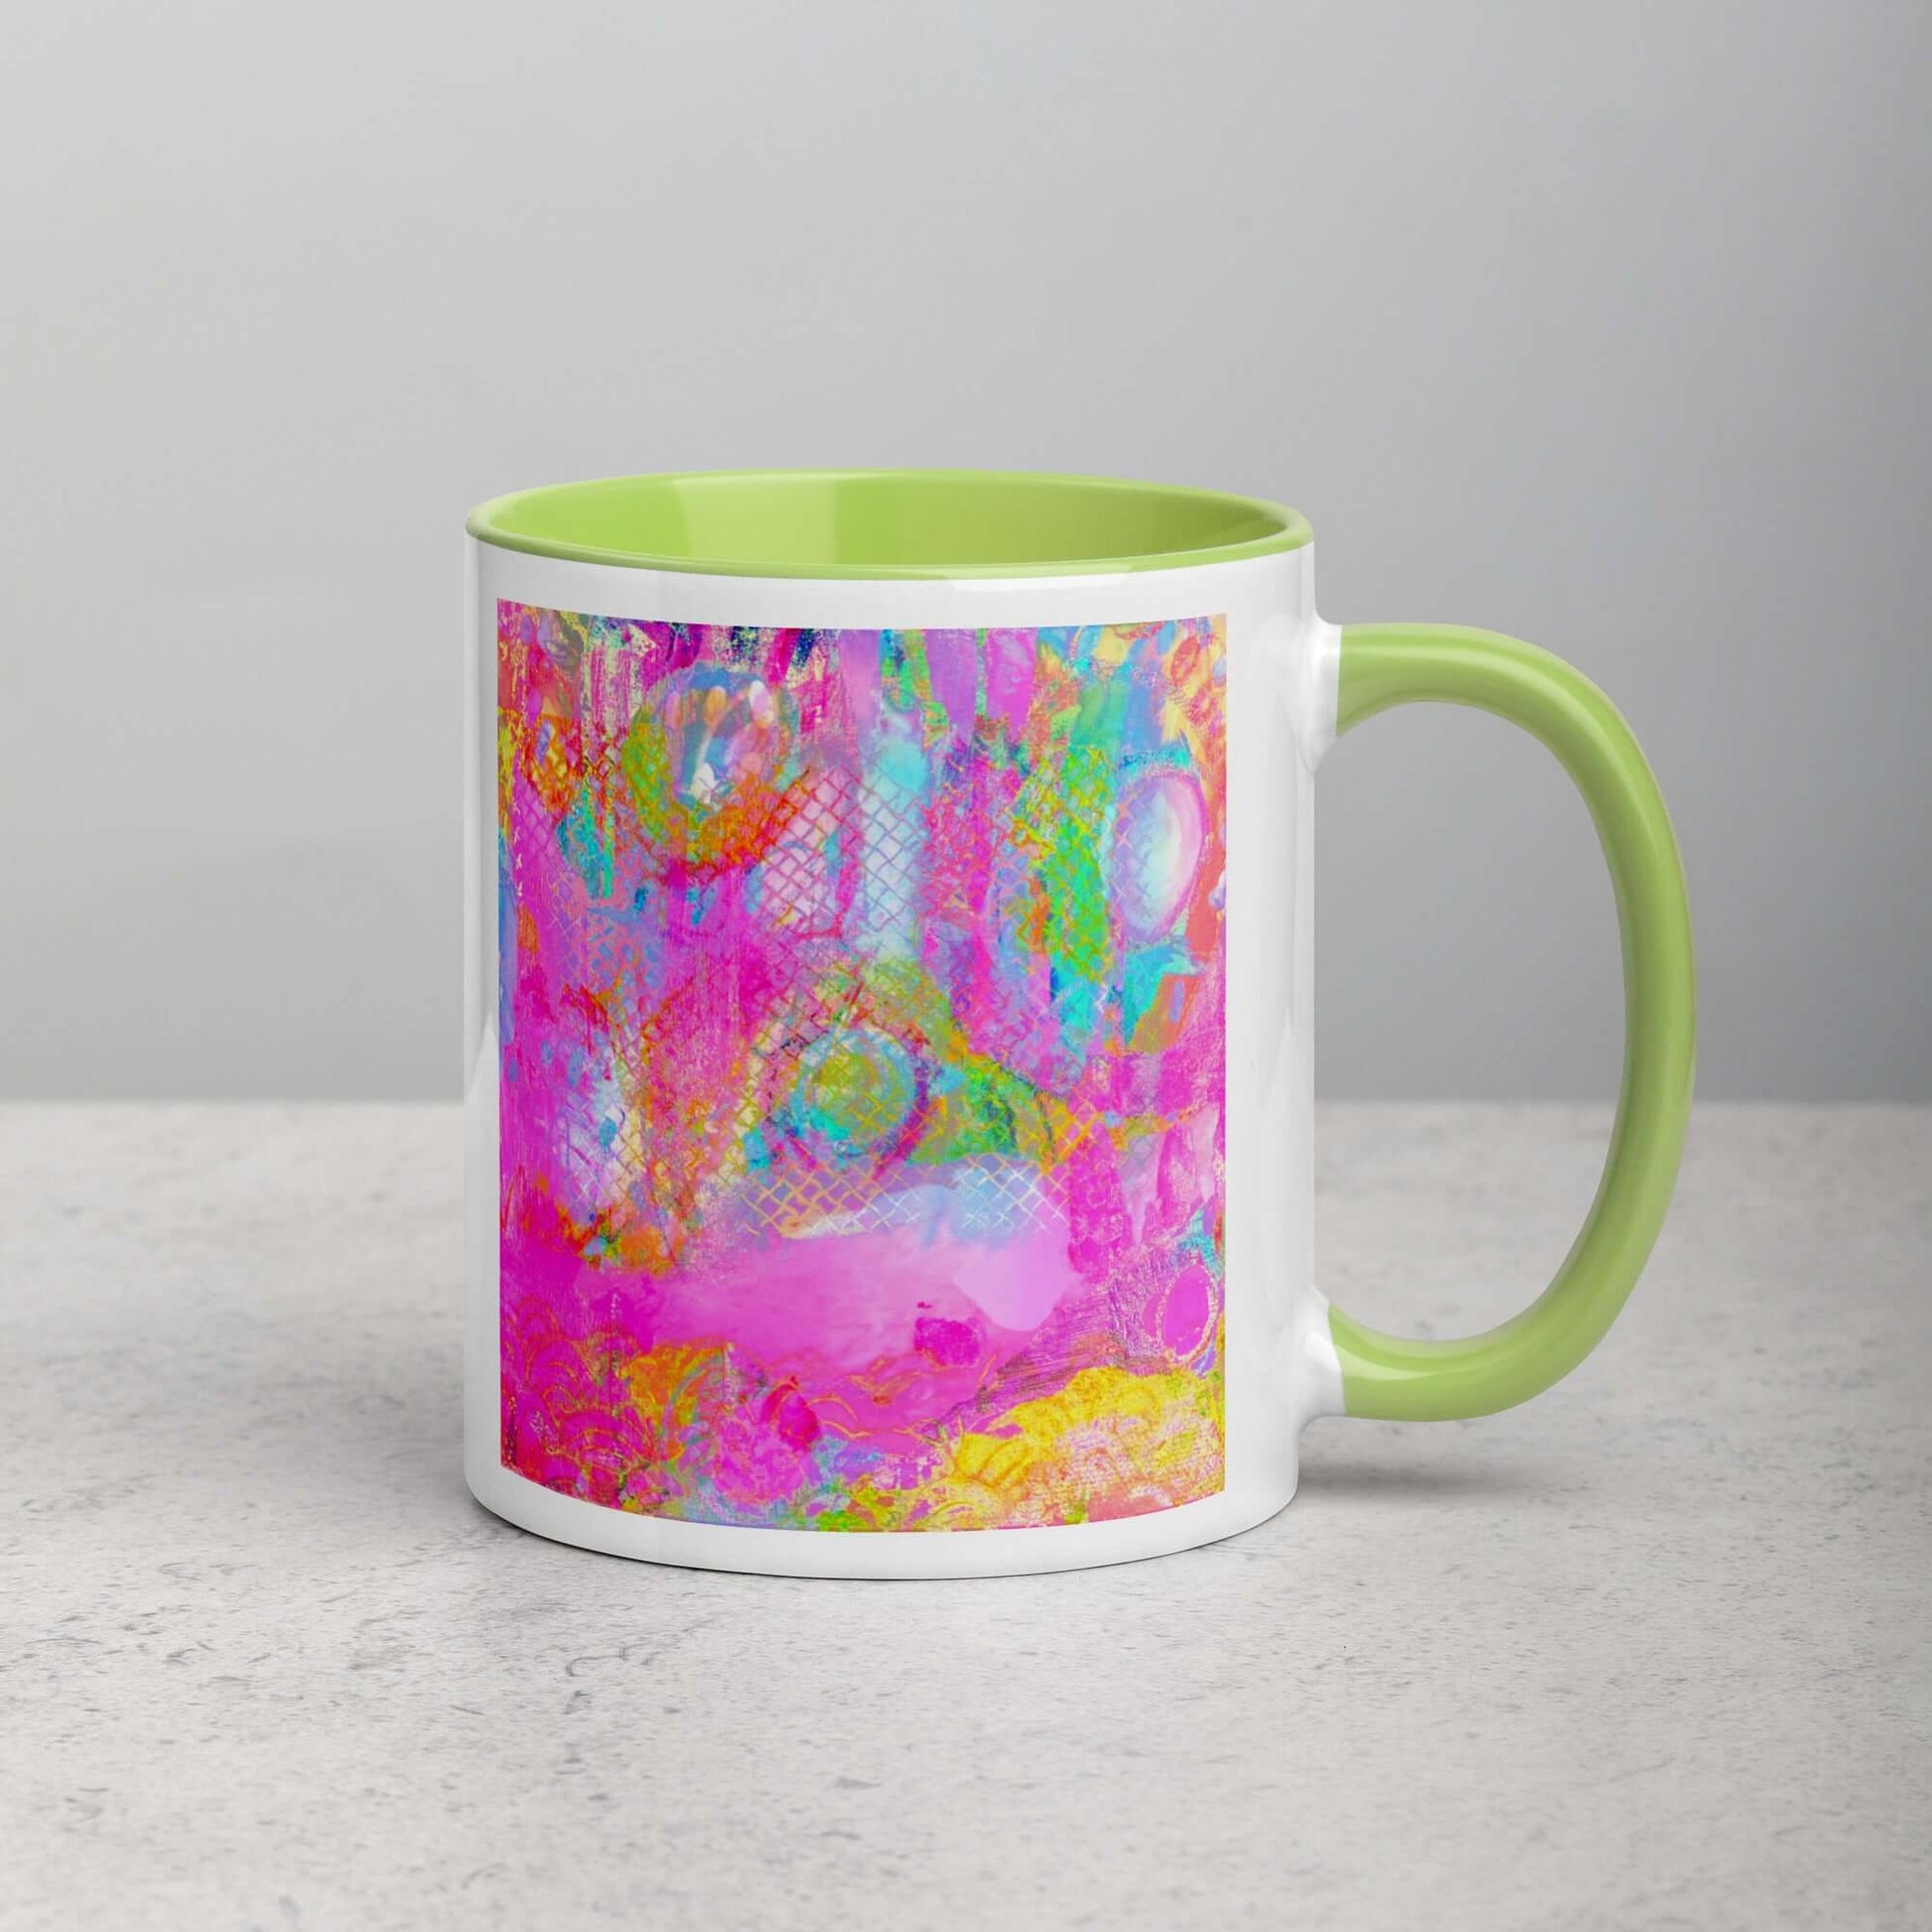  Drippy Pink “Candyland” Abstract Art Mug with Lime Green Color Inside Right Handed Front View